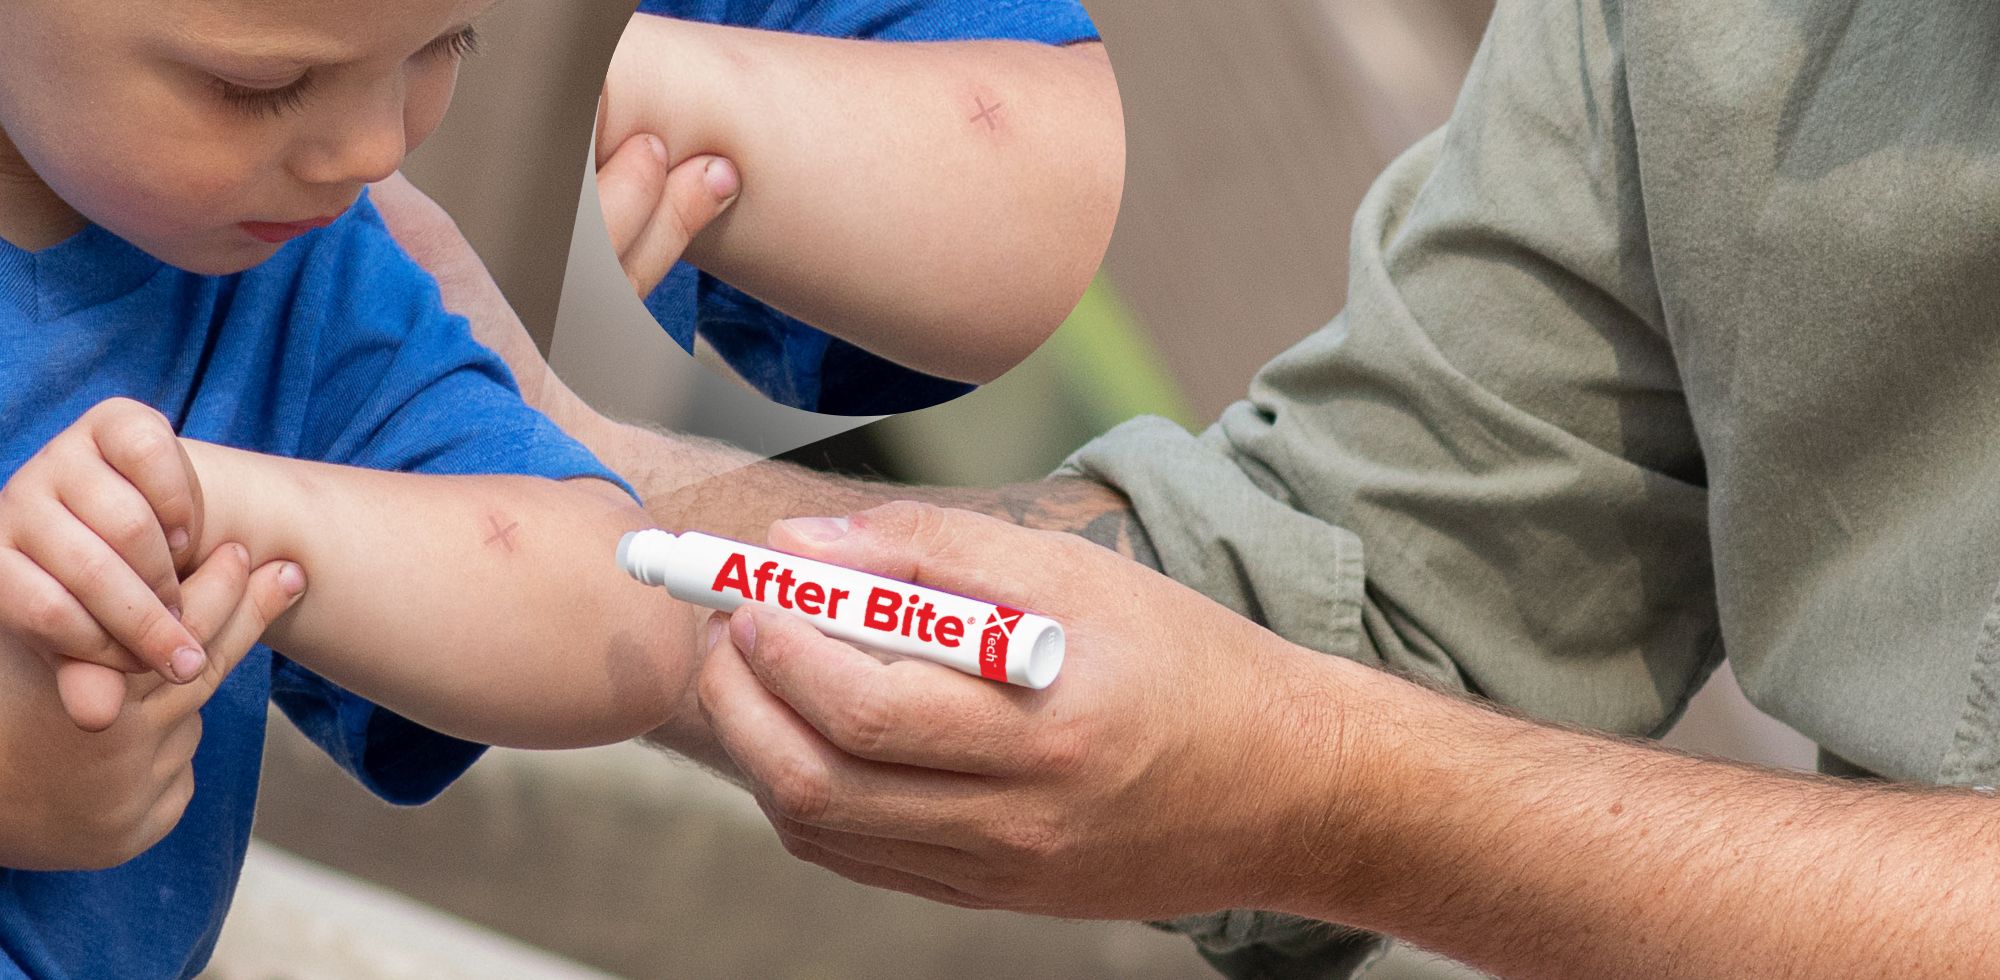 Man using After Bite X-Tech on little boy with close up of X on arm